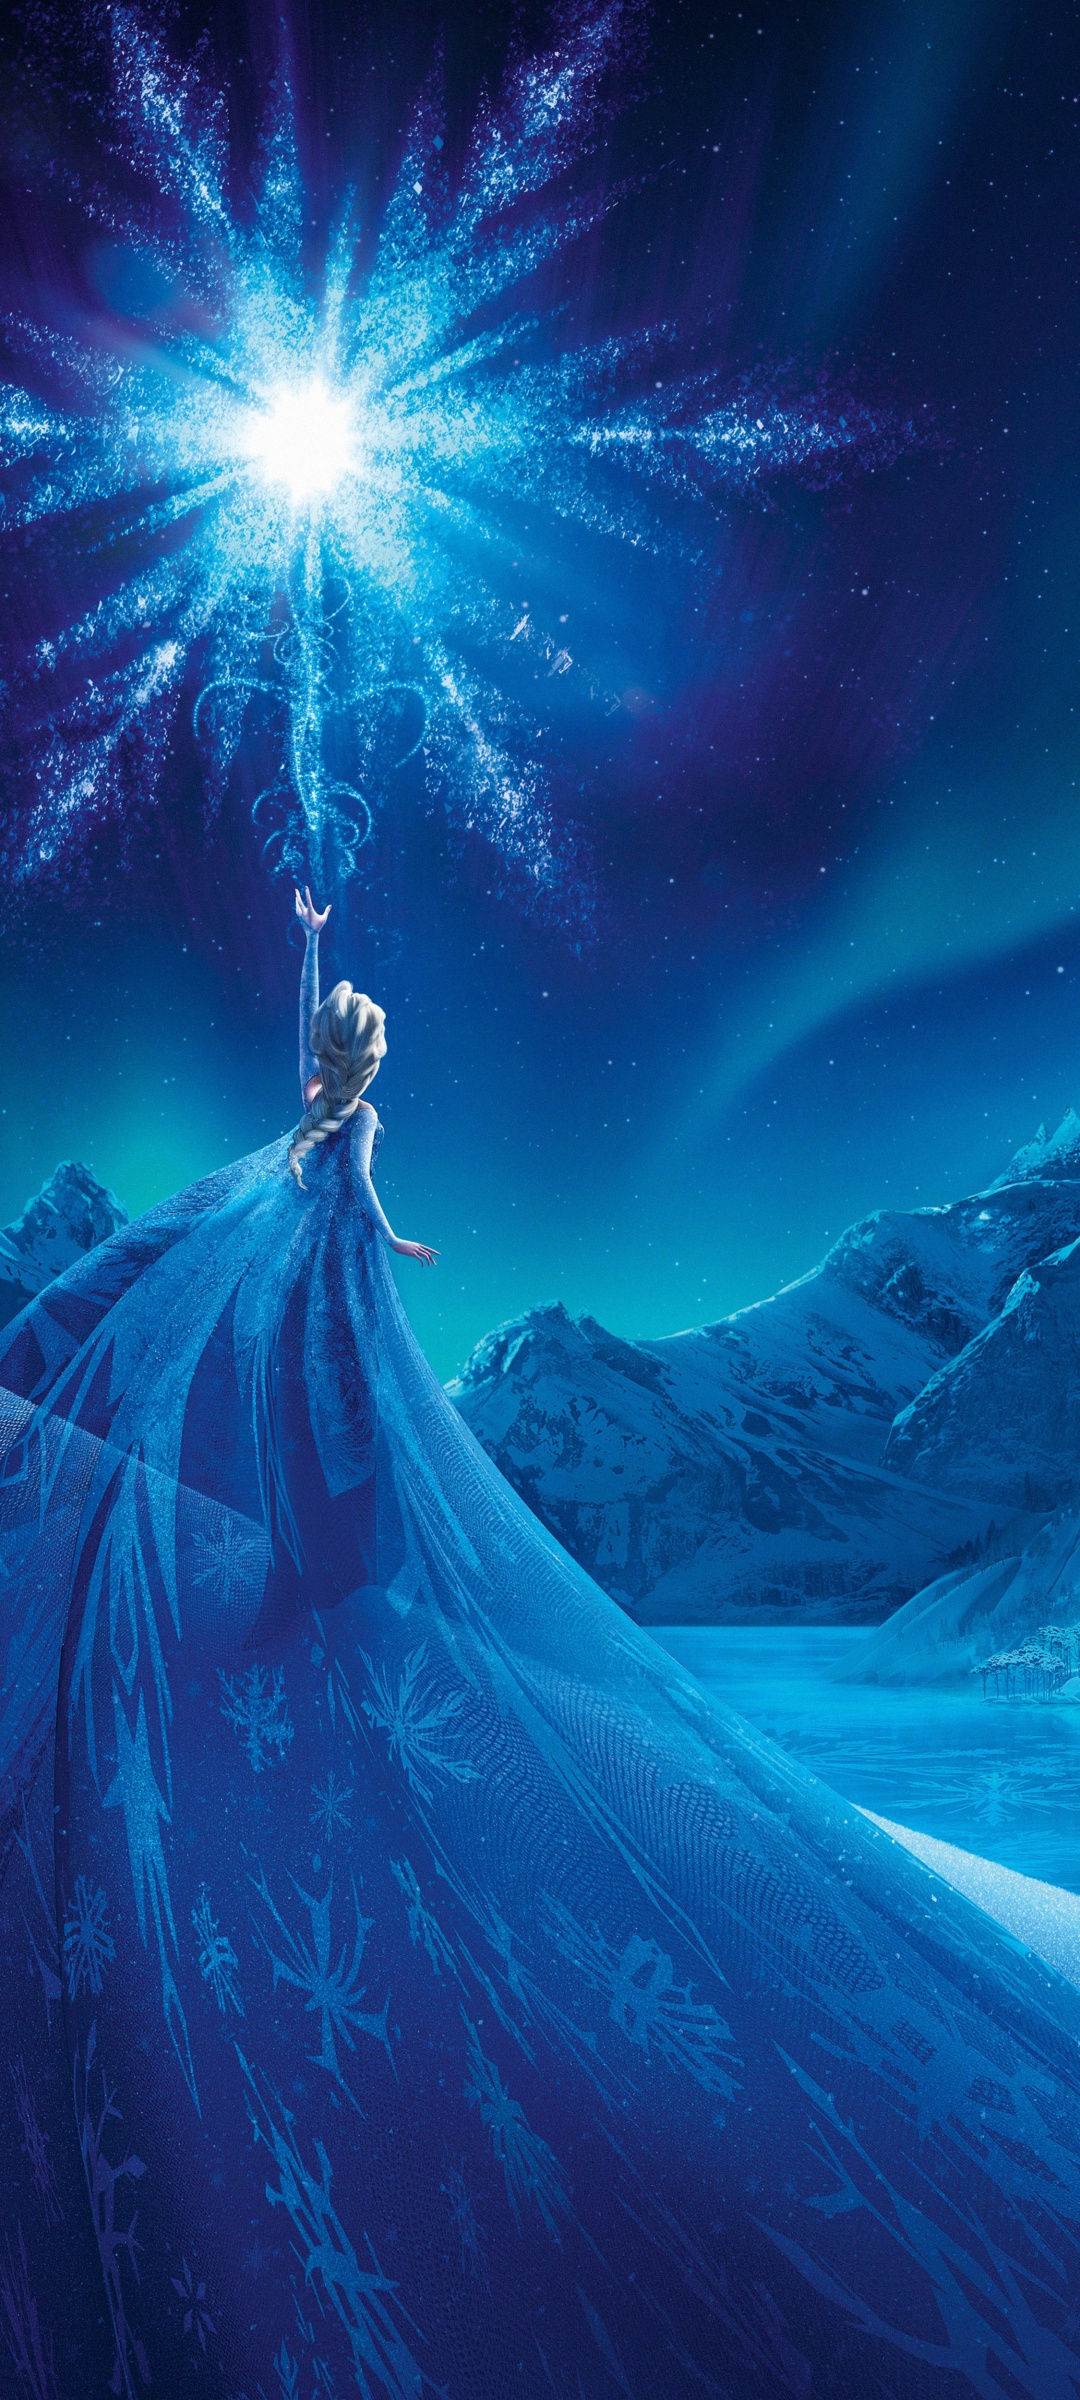 A woman dressed in blue is standing on top of the mountain - Elsa